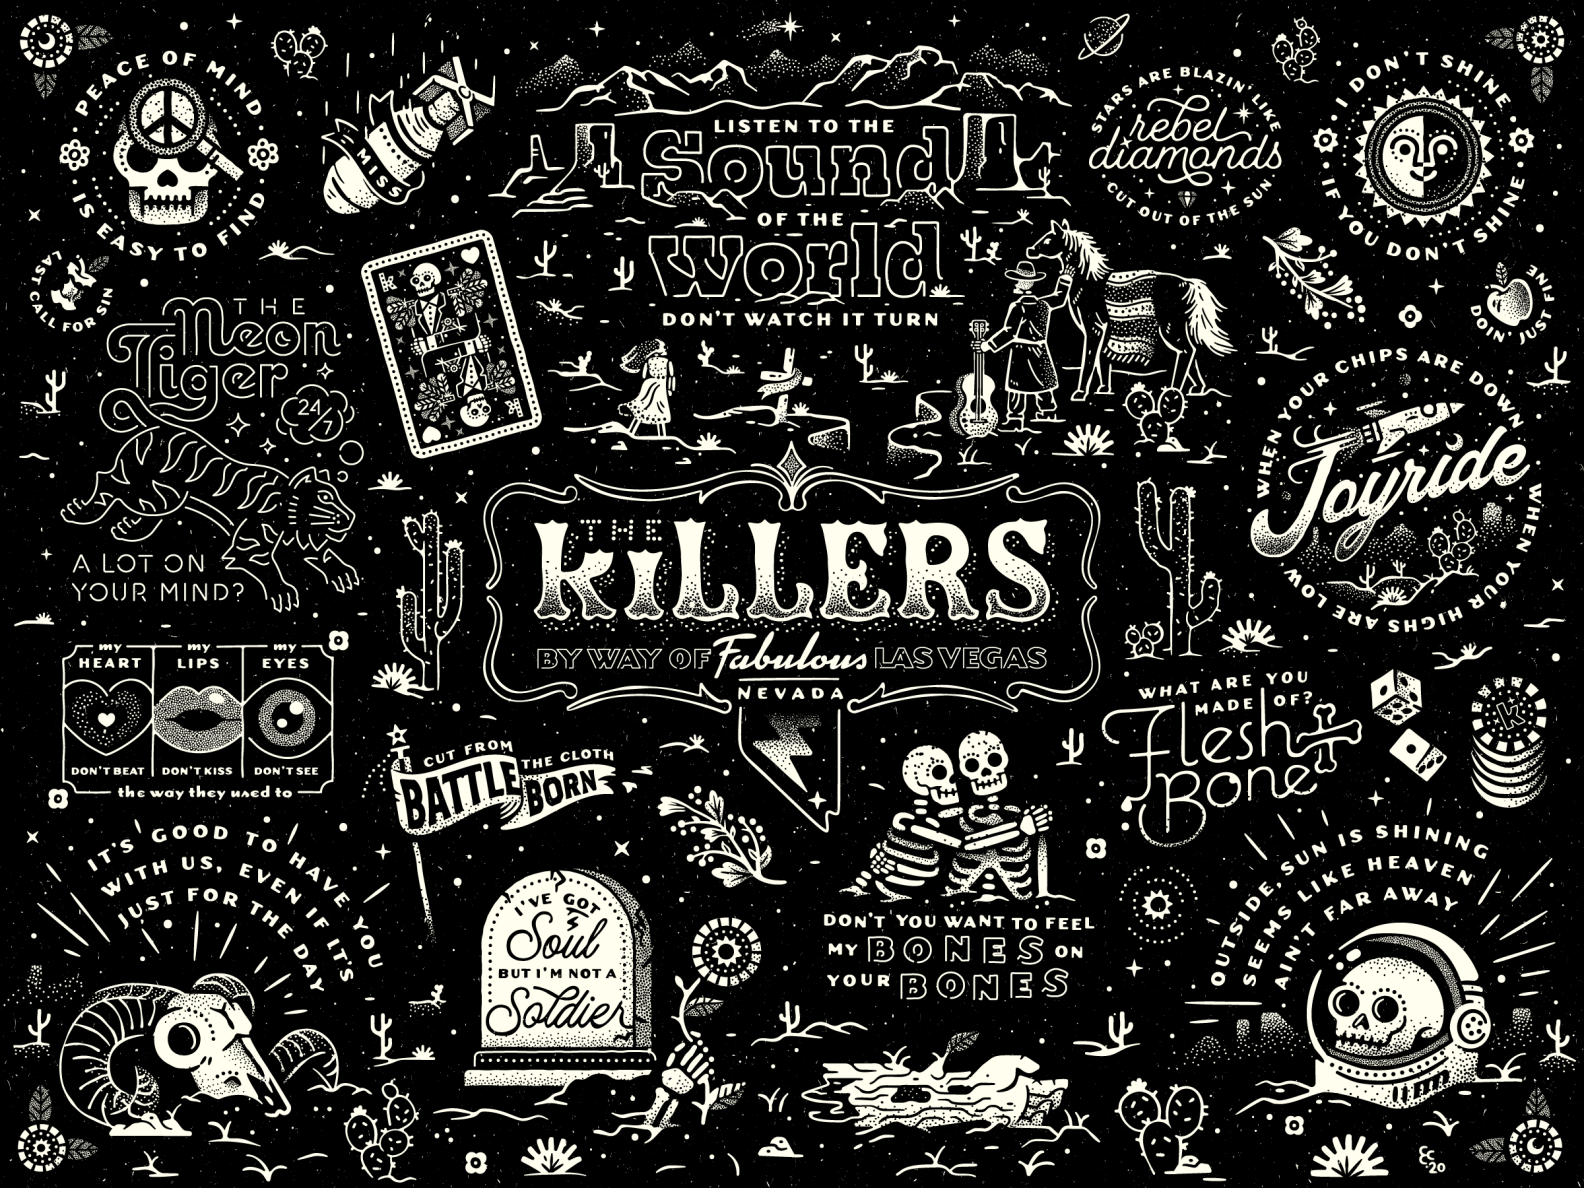 The Music of The Killers by Erikas on Dribbble